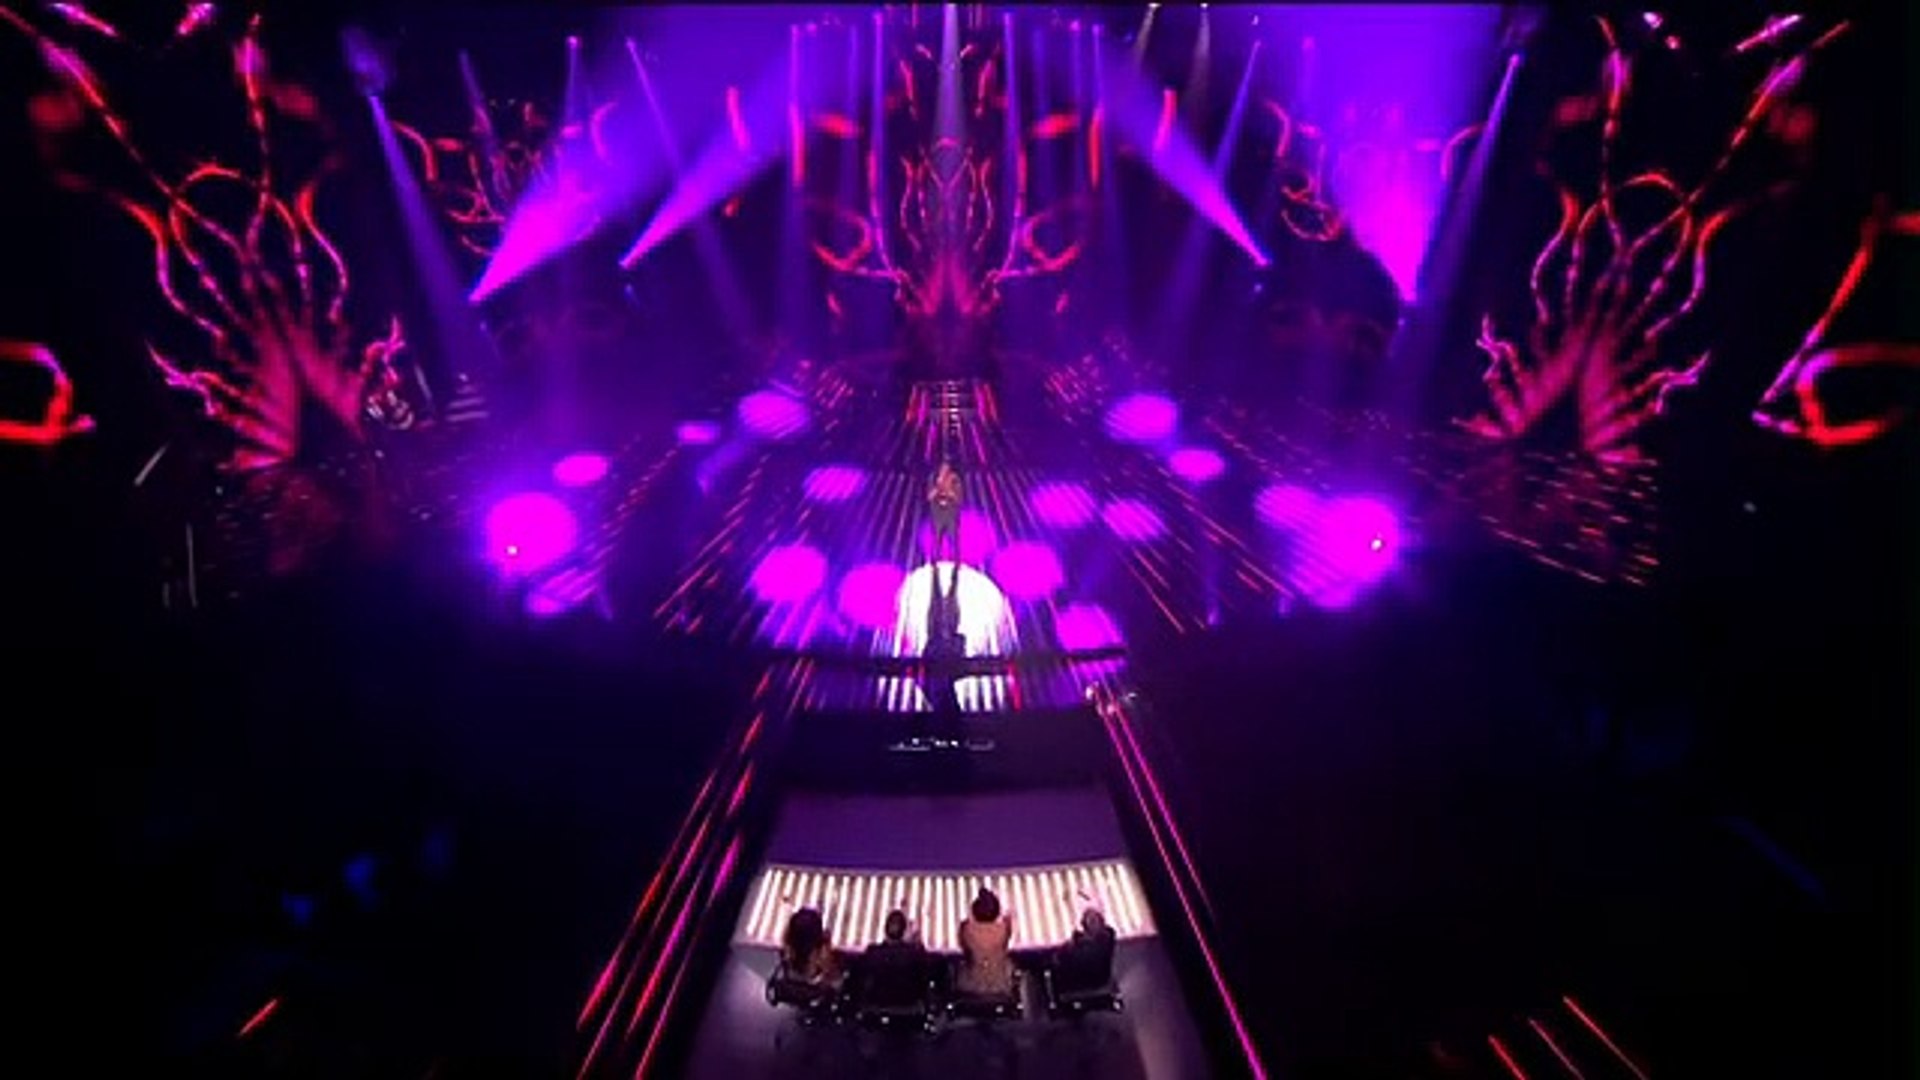 Hannah Barrett sings Wrecking Ball by Miley Cyrus - Live Week 5 - The X Factor 2013 -official channe